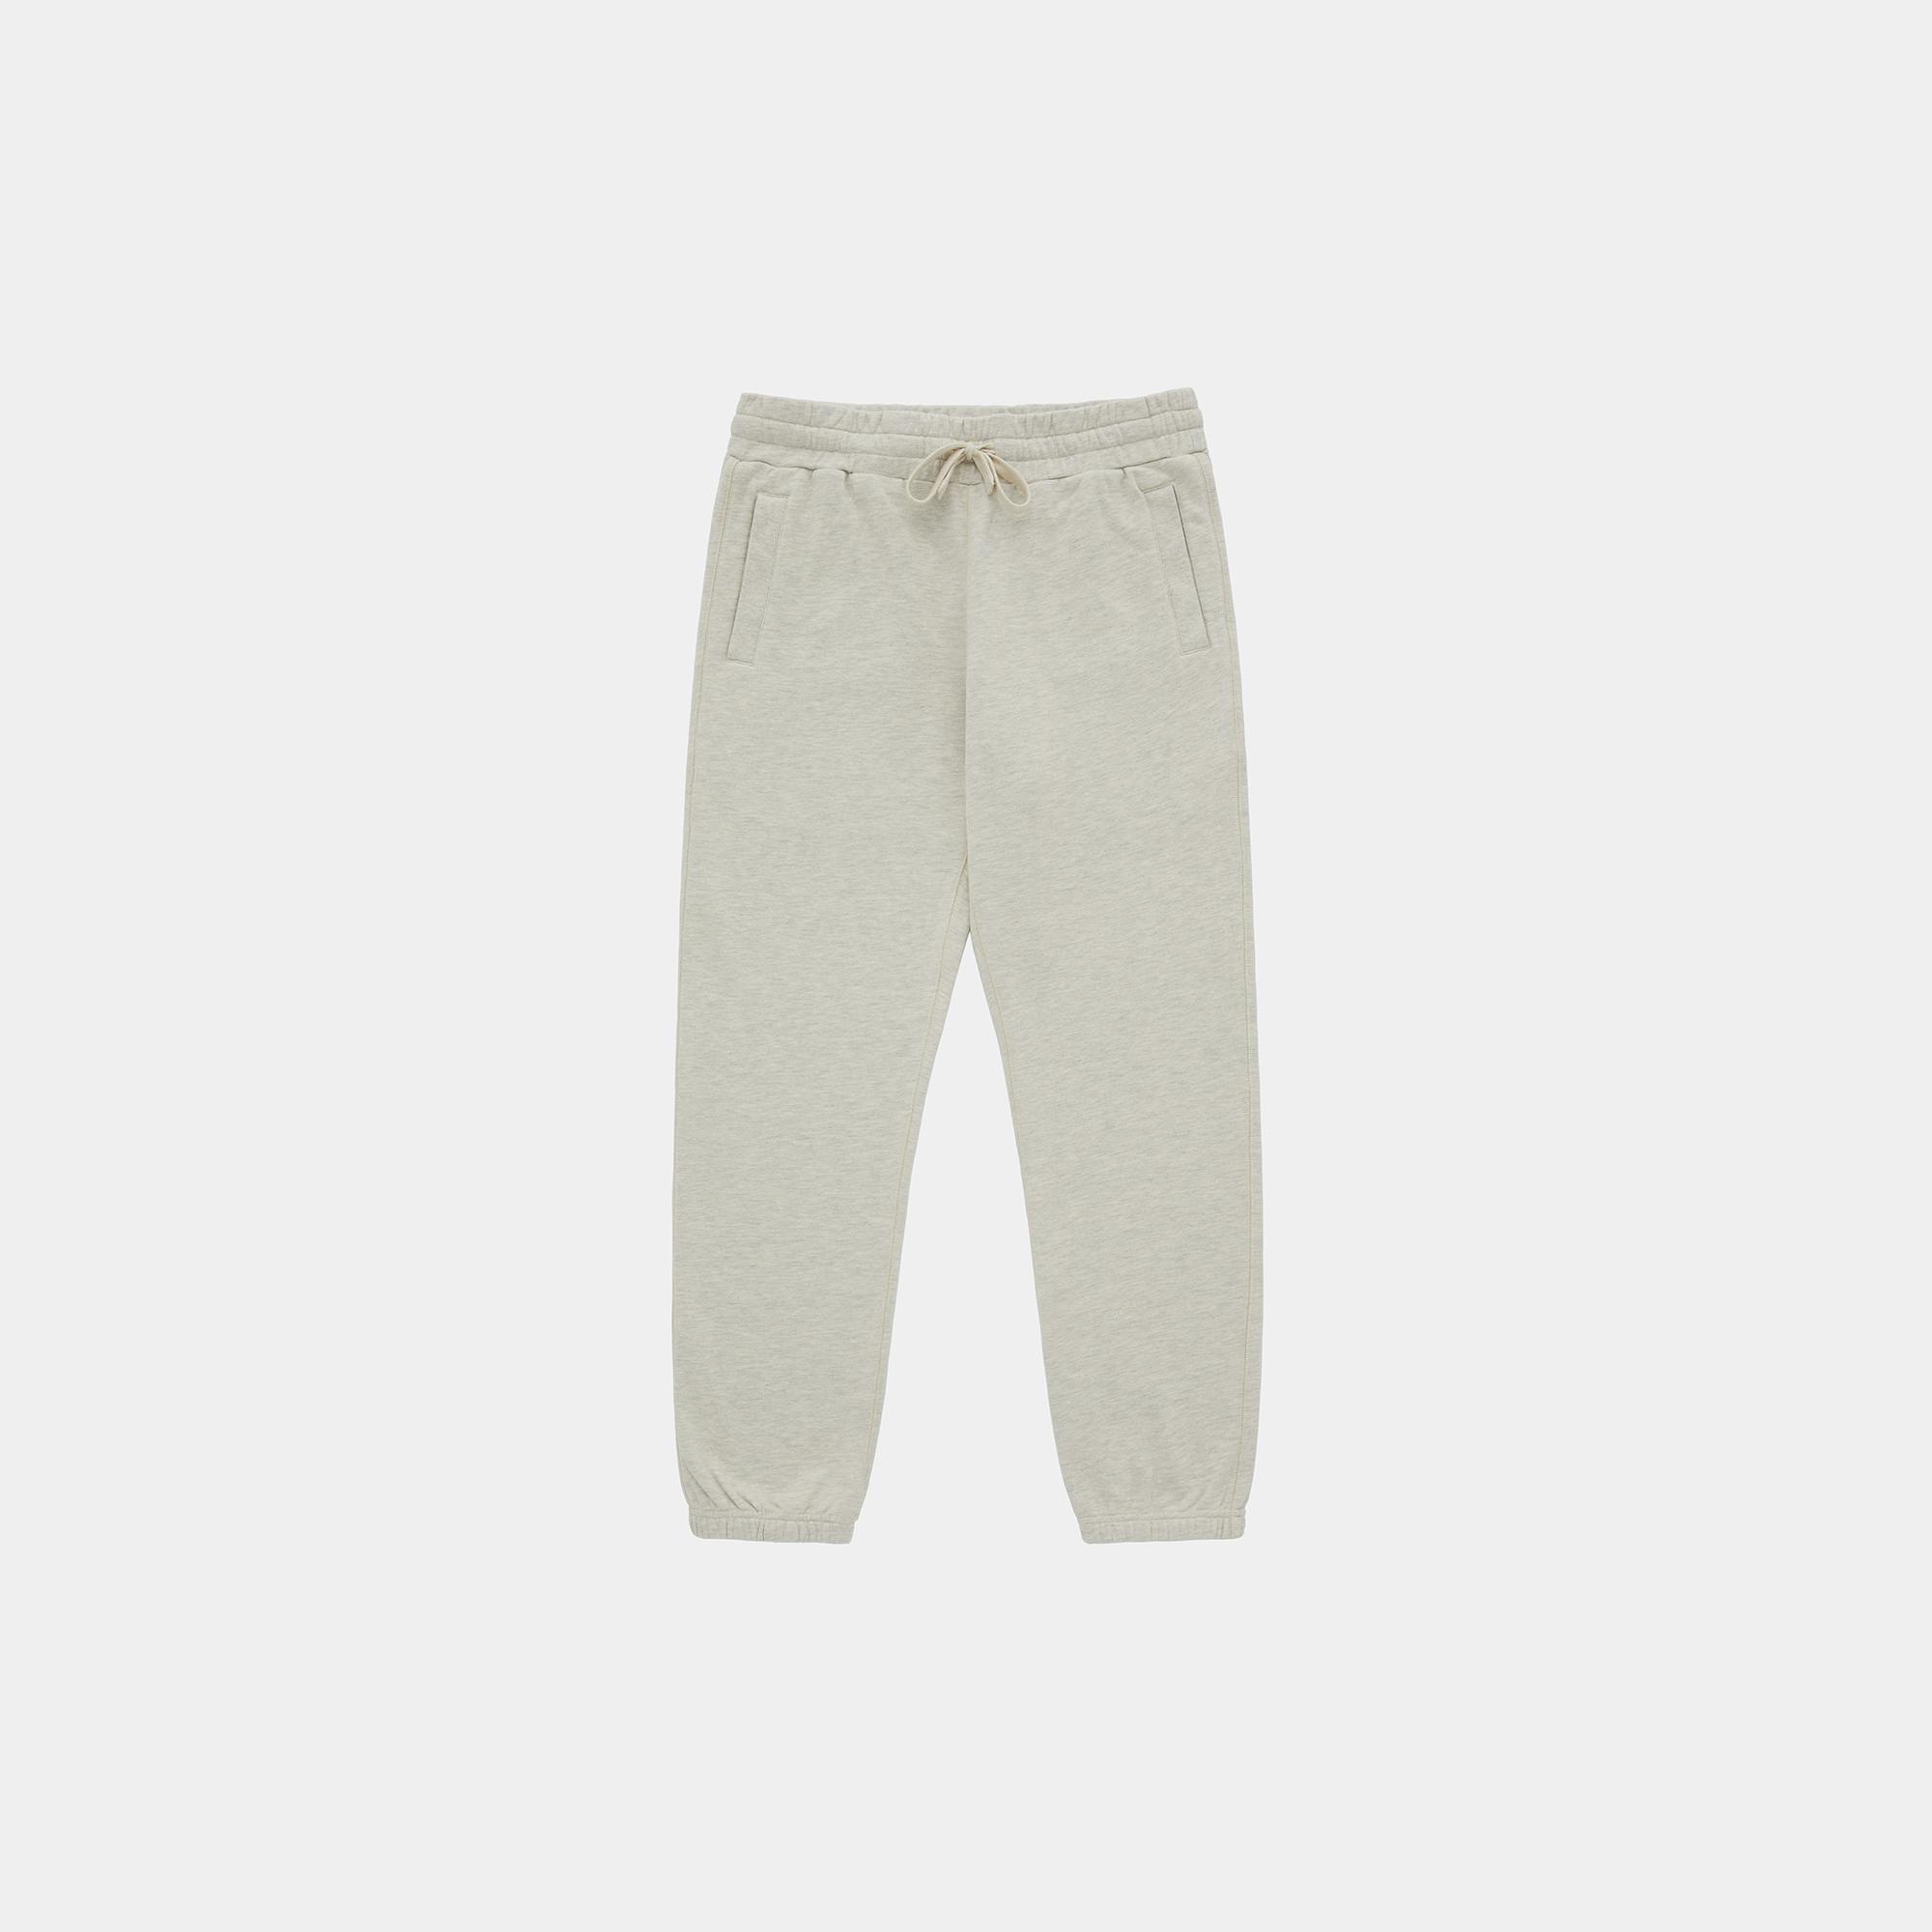 PDP Image: Lounge Sweatpants (M's Fit - Oatmeal) - 3:2 - Front